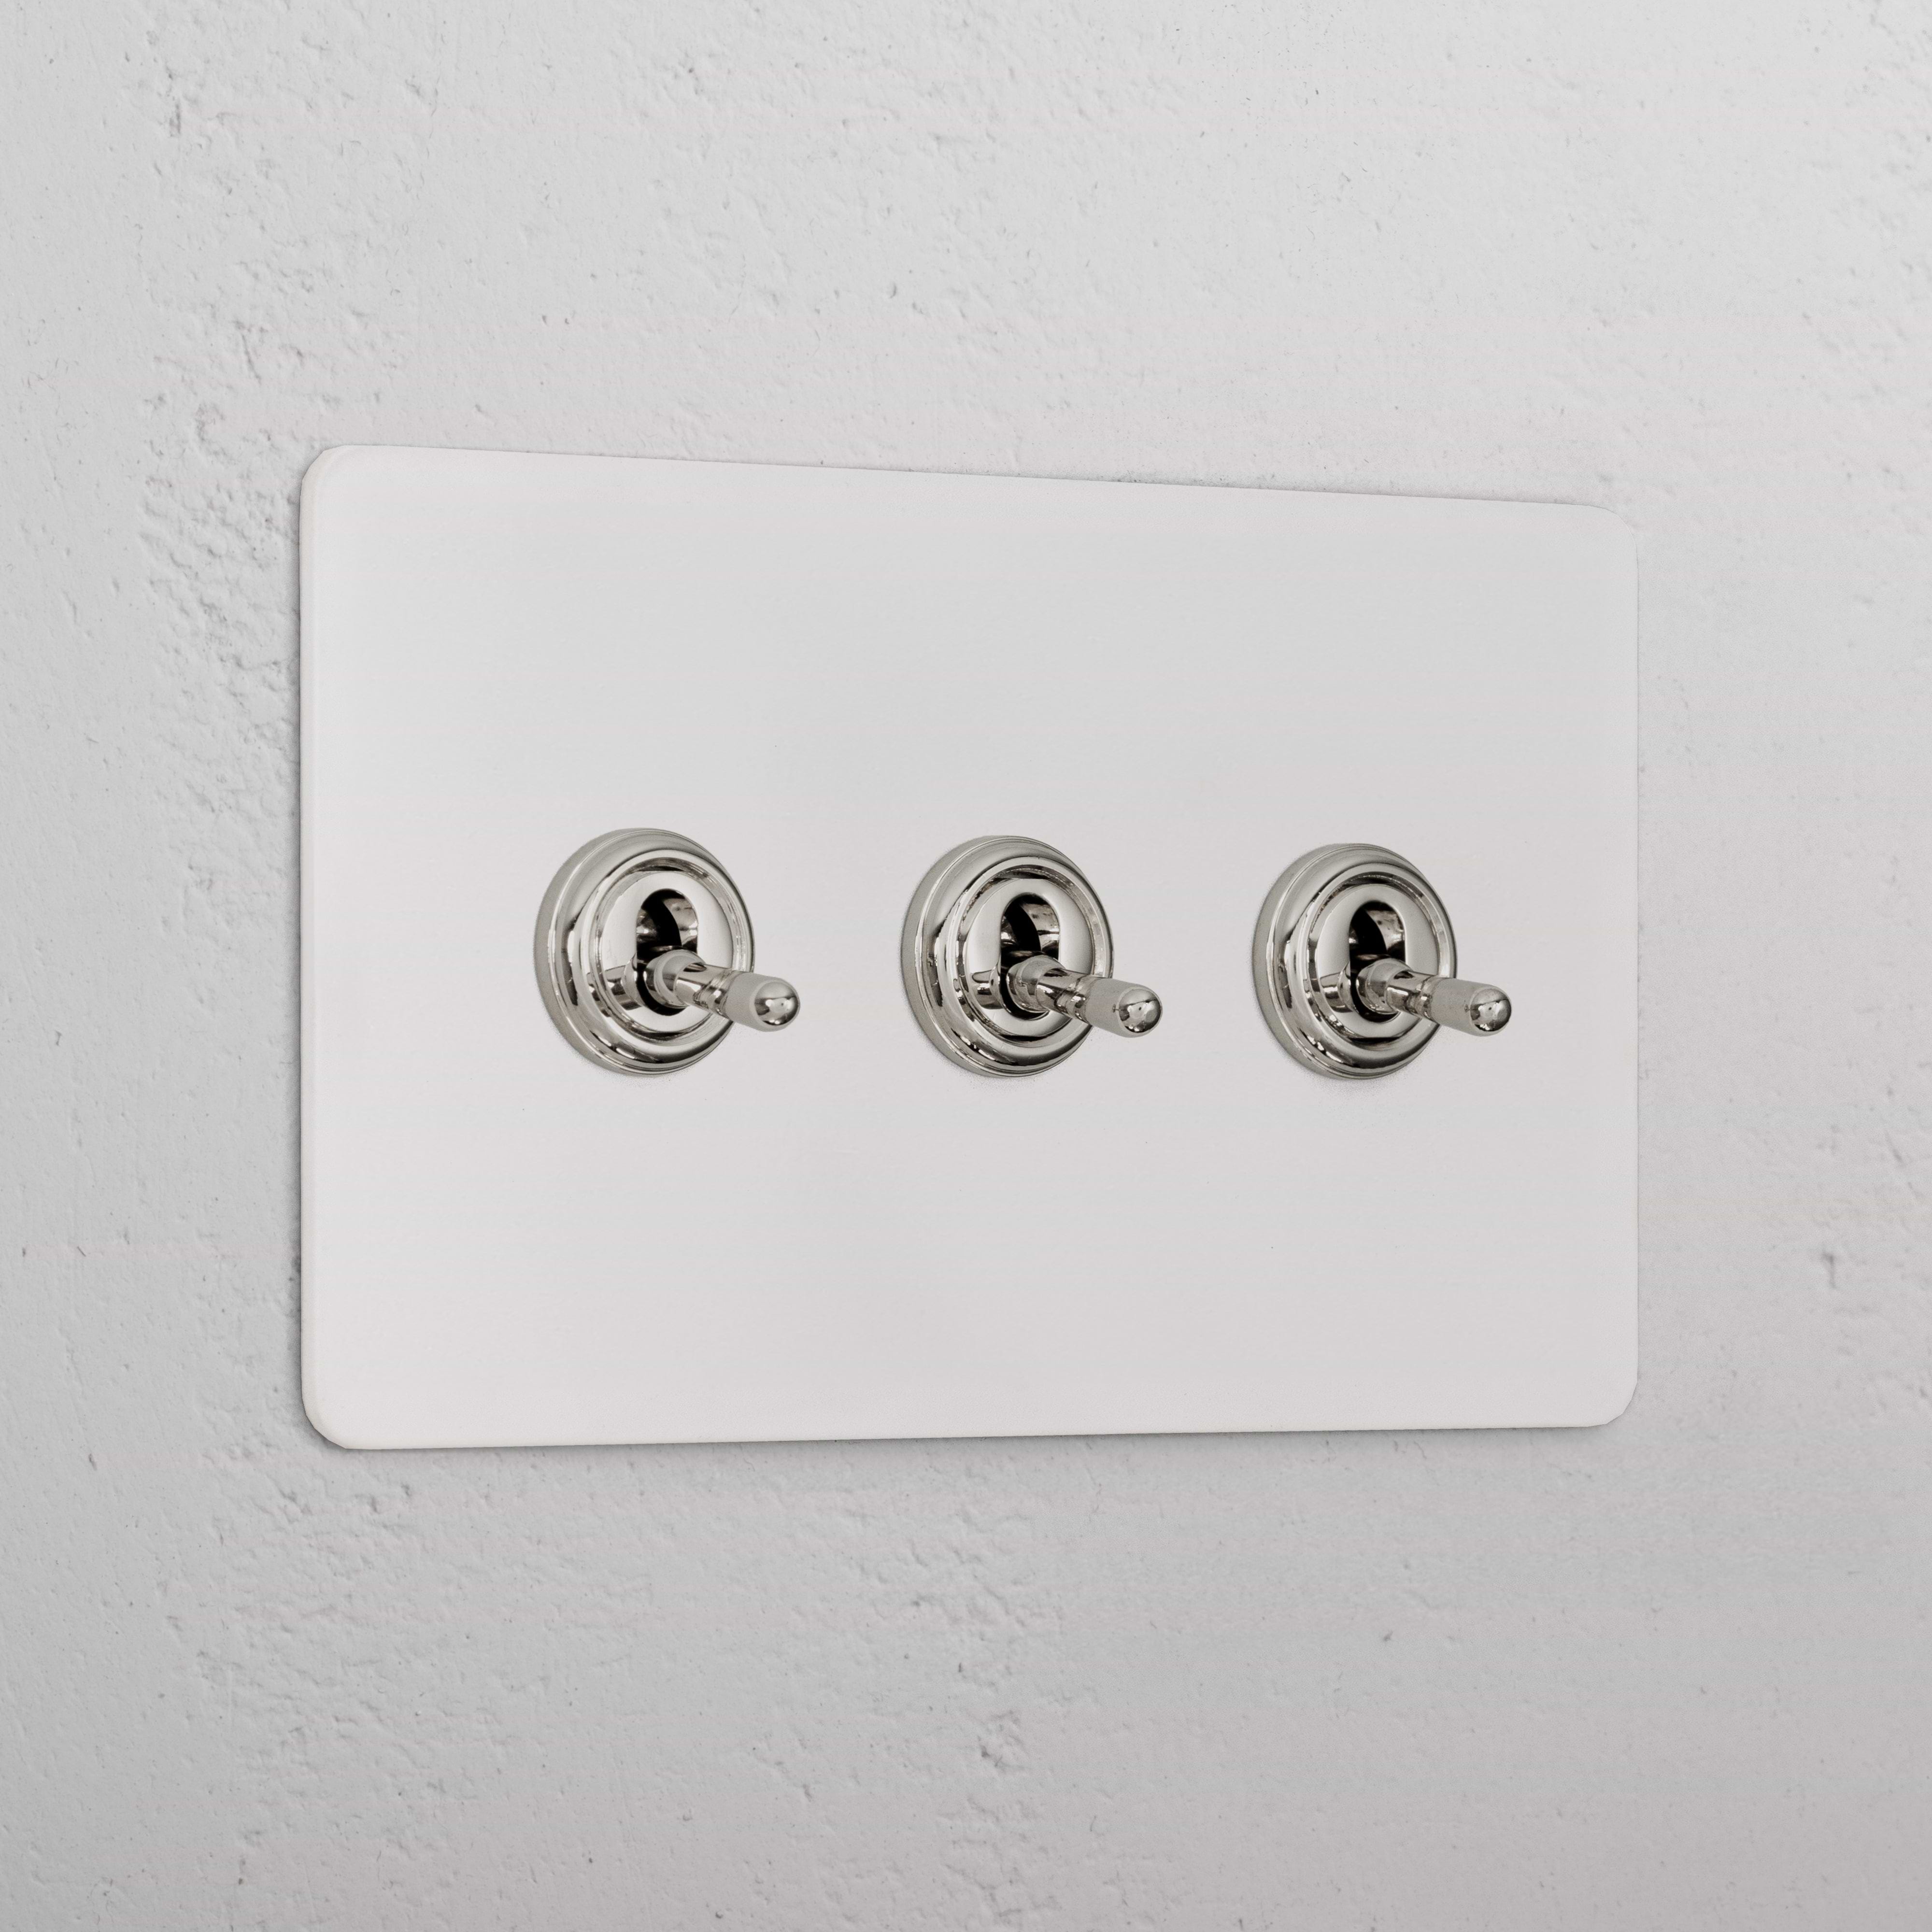 3G Two Way Toggle Switch - Paintable Polished Nickel